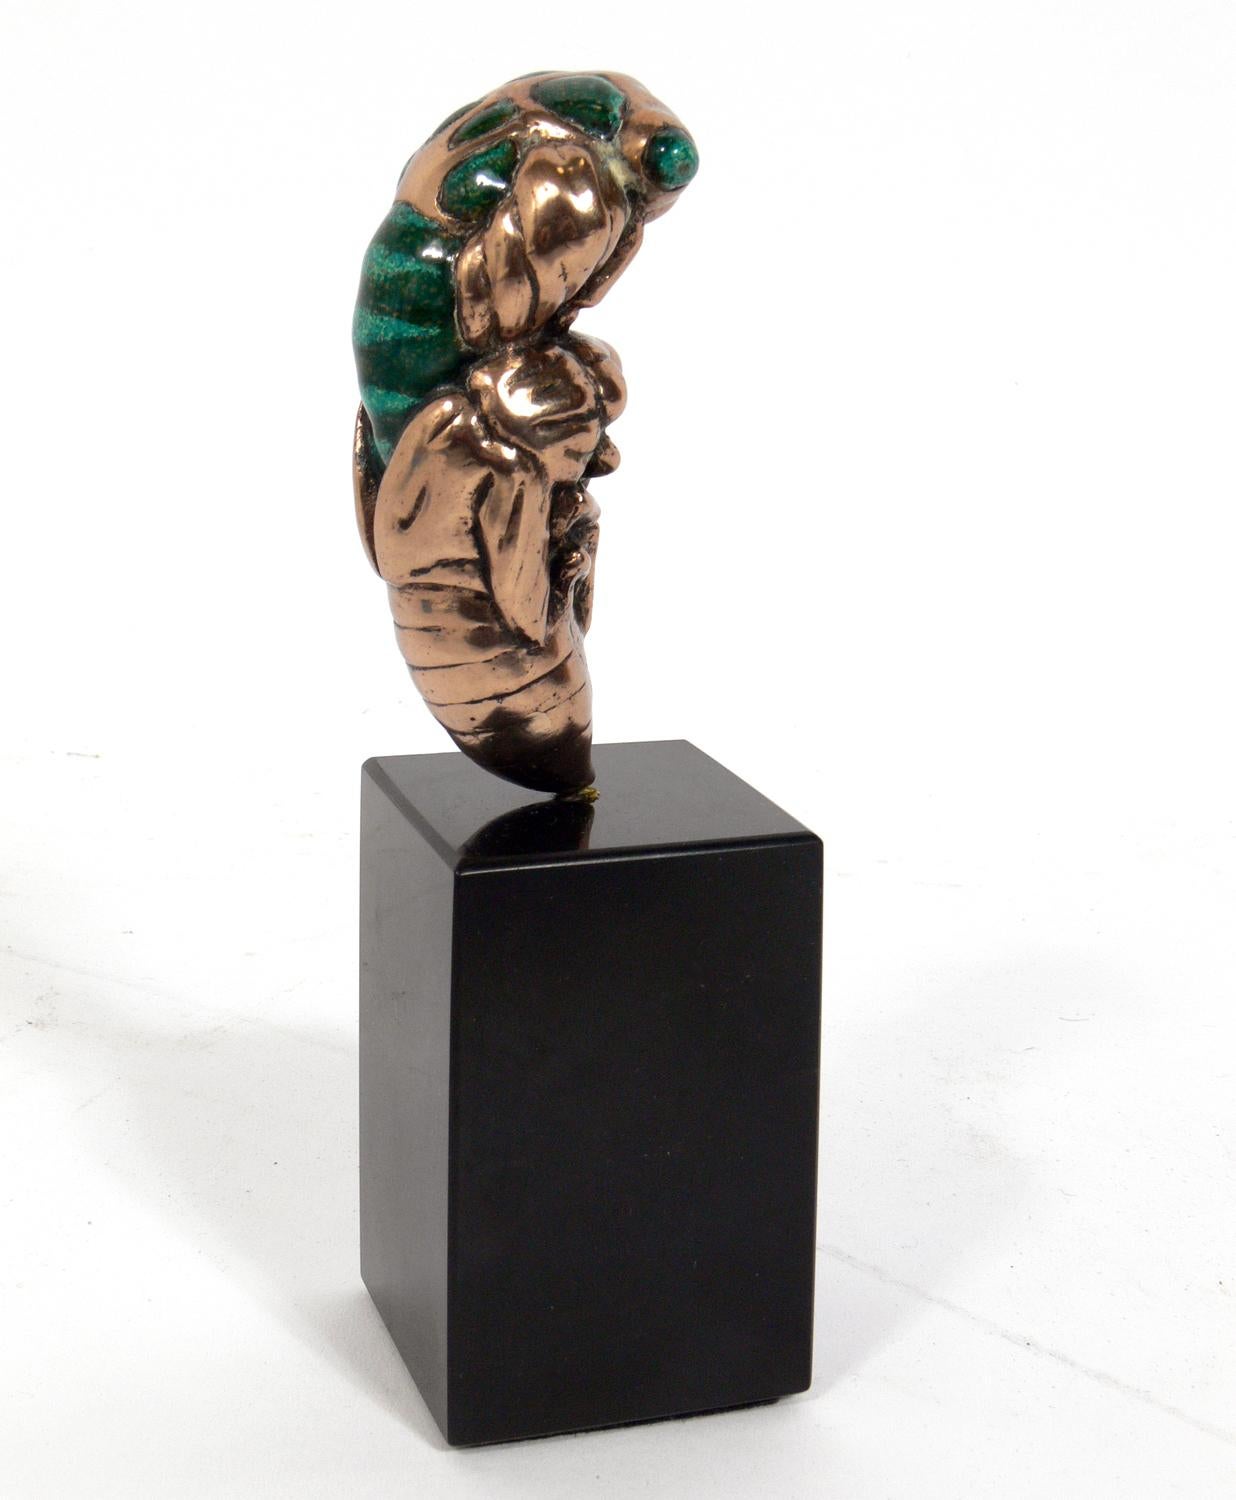 Granite Bronze and Enamel Cicada Sculpture by Mary Frances Wawrytko